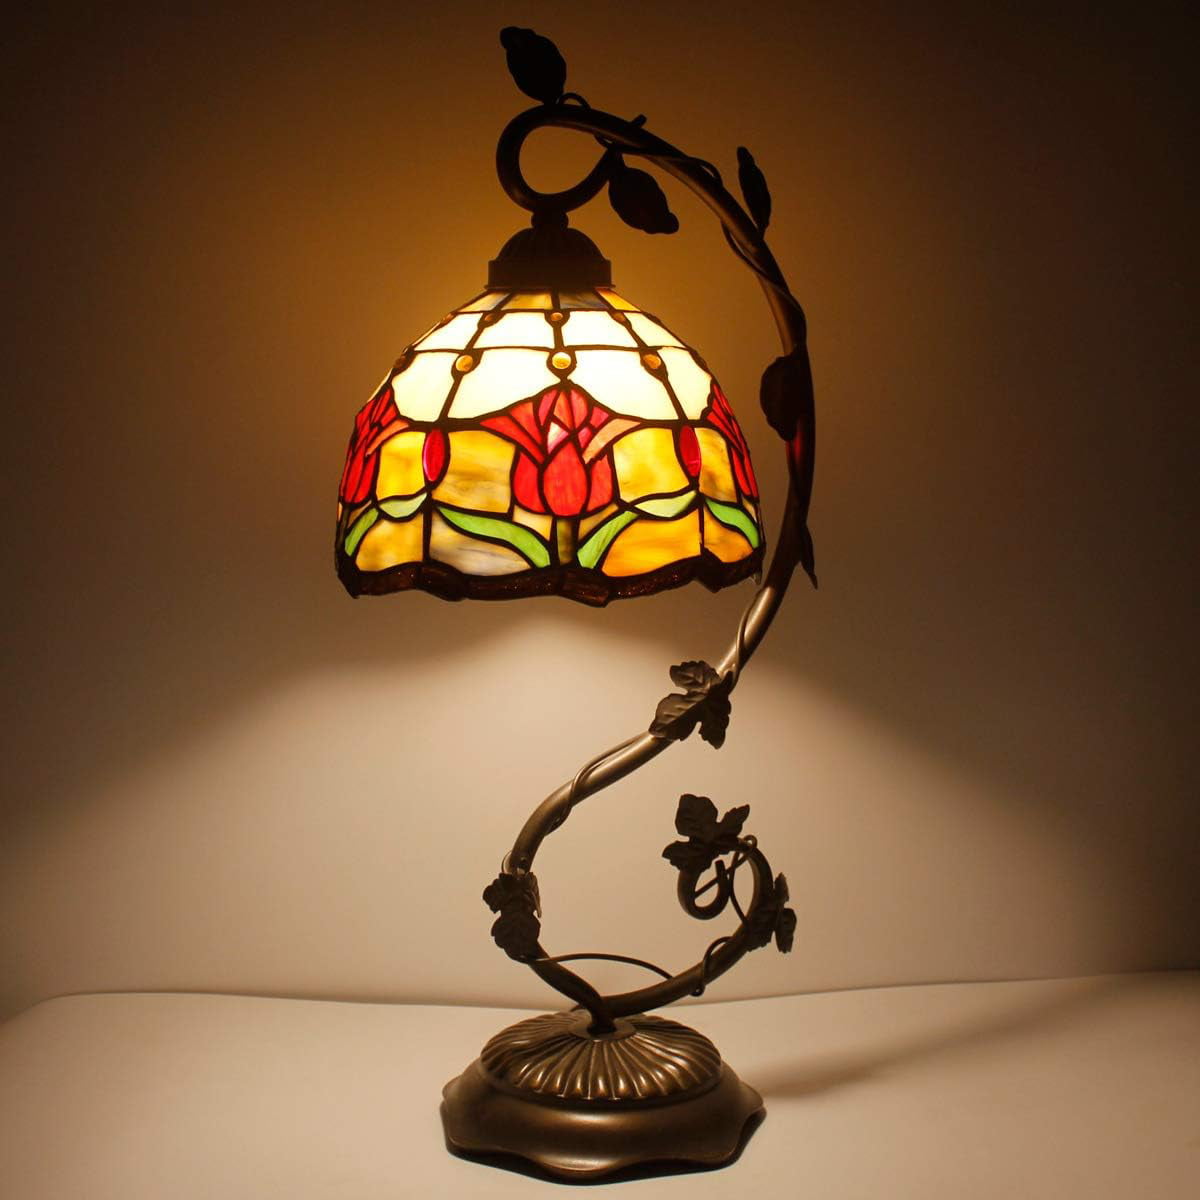 GEDUBIUBOO  Lamp Red Stained Glass Tulip Table Lamp  Metal Leaf Base 8X10X21 Inches Reading Desk Light Decor Small Space Bedroom  Office S030 Series